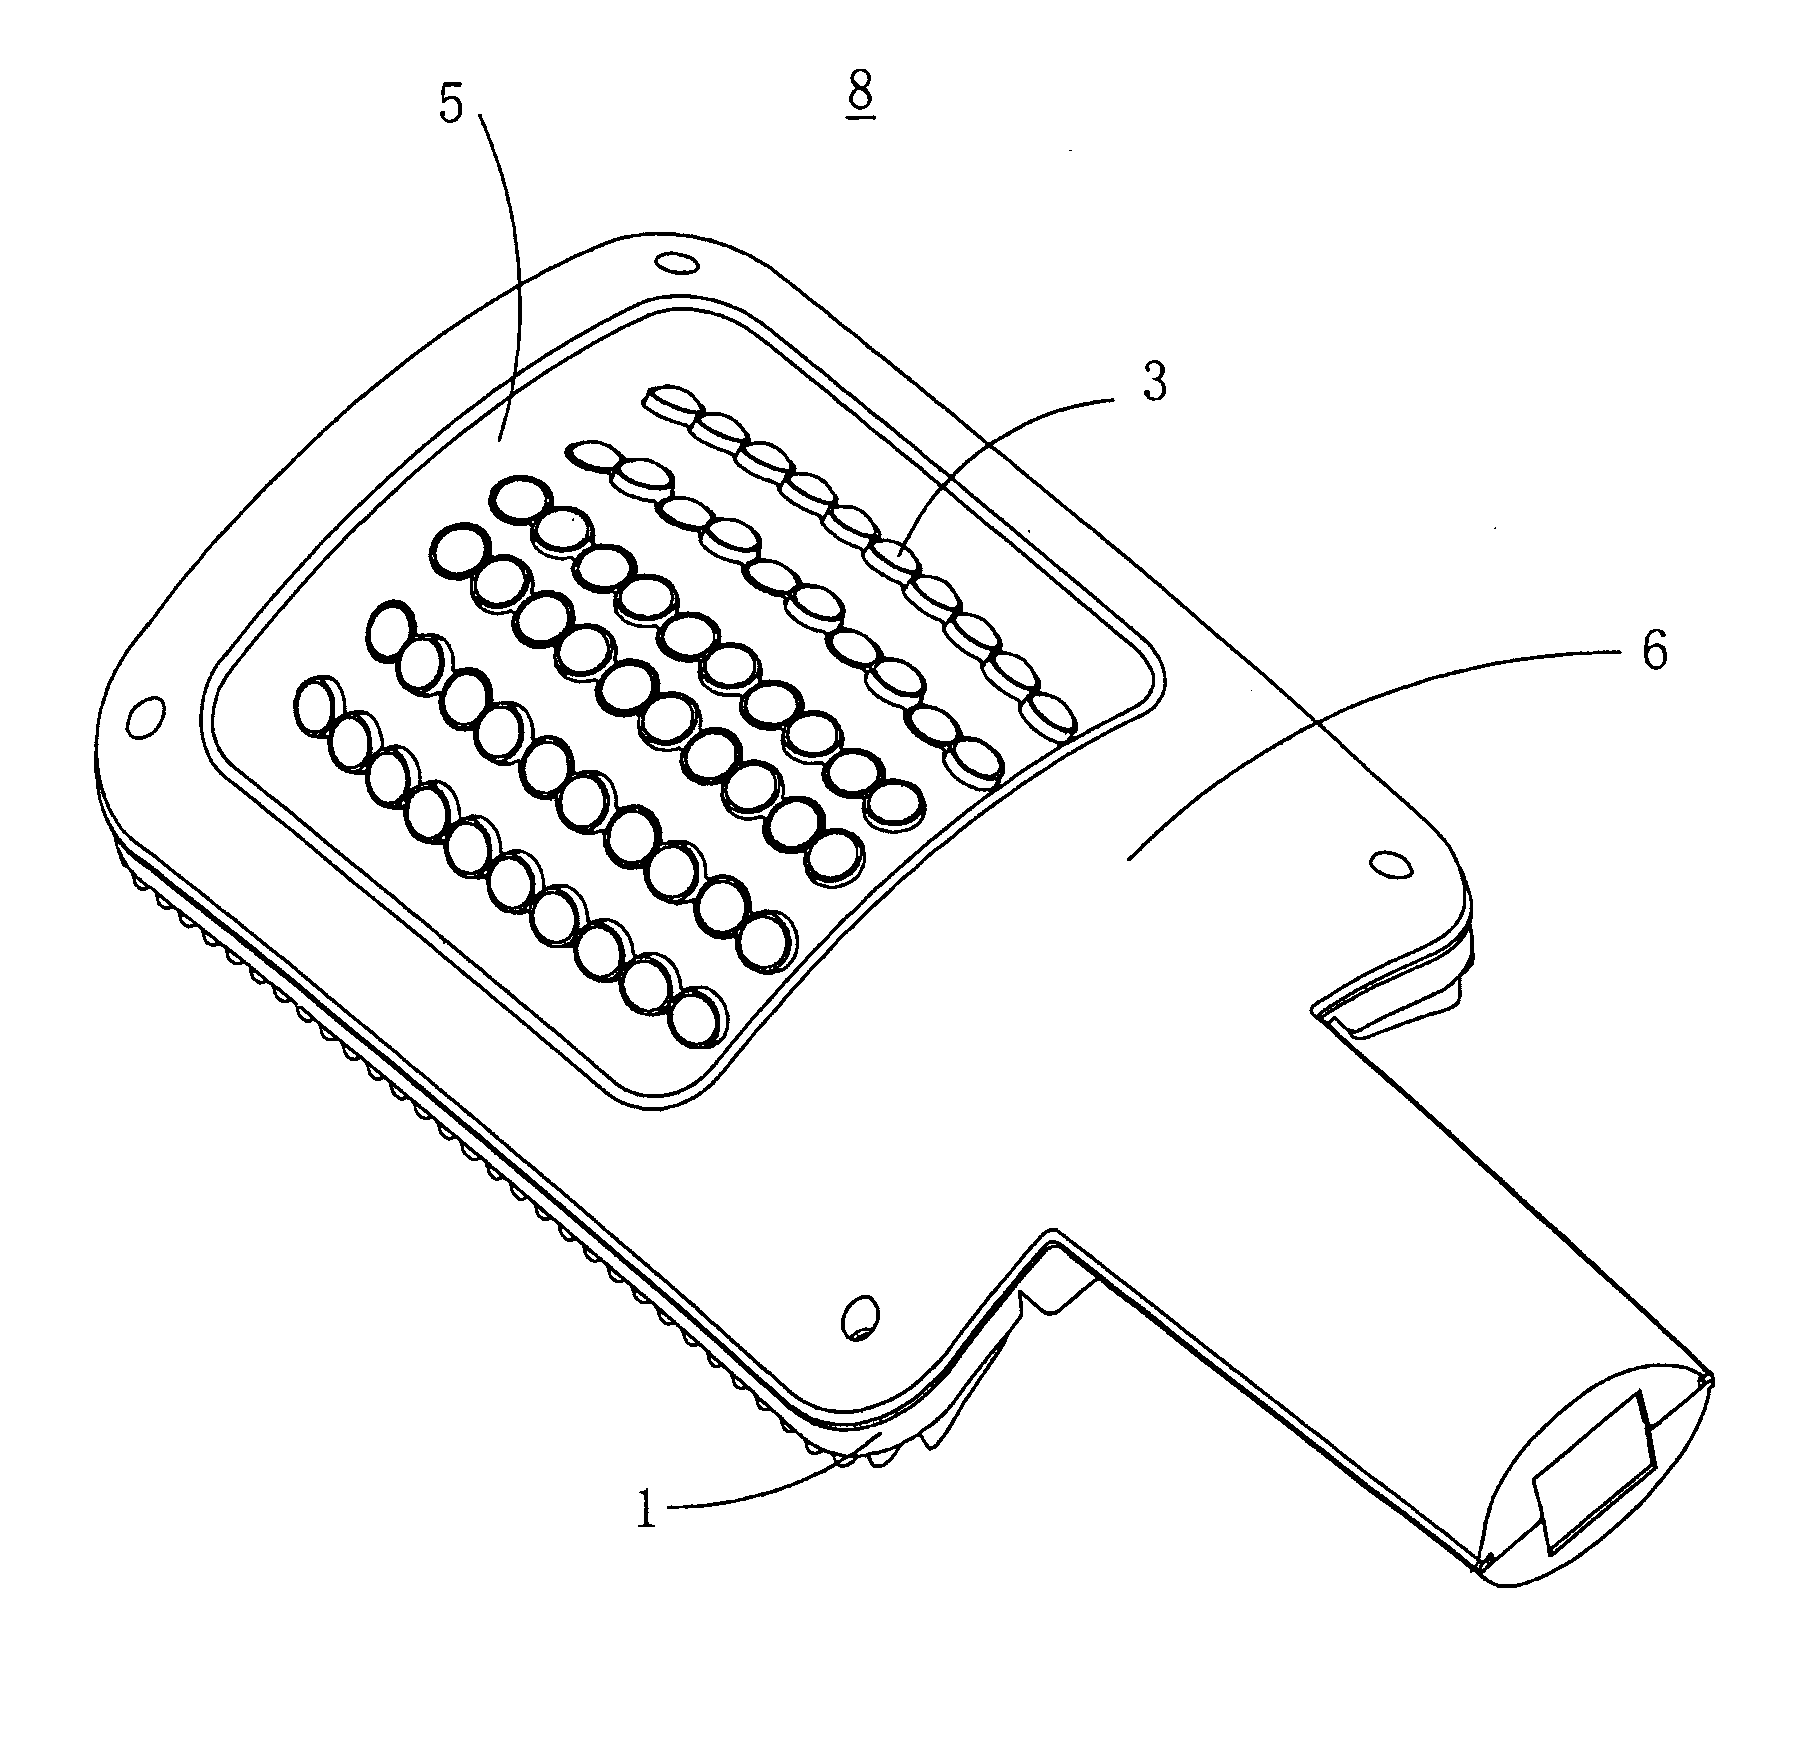 High-power light emitting diode (LED) street lamp and body frame thereof